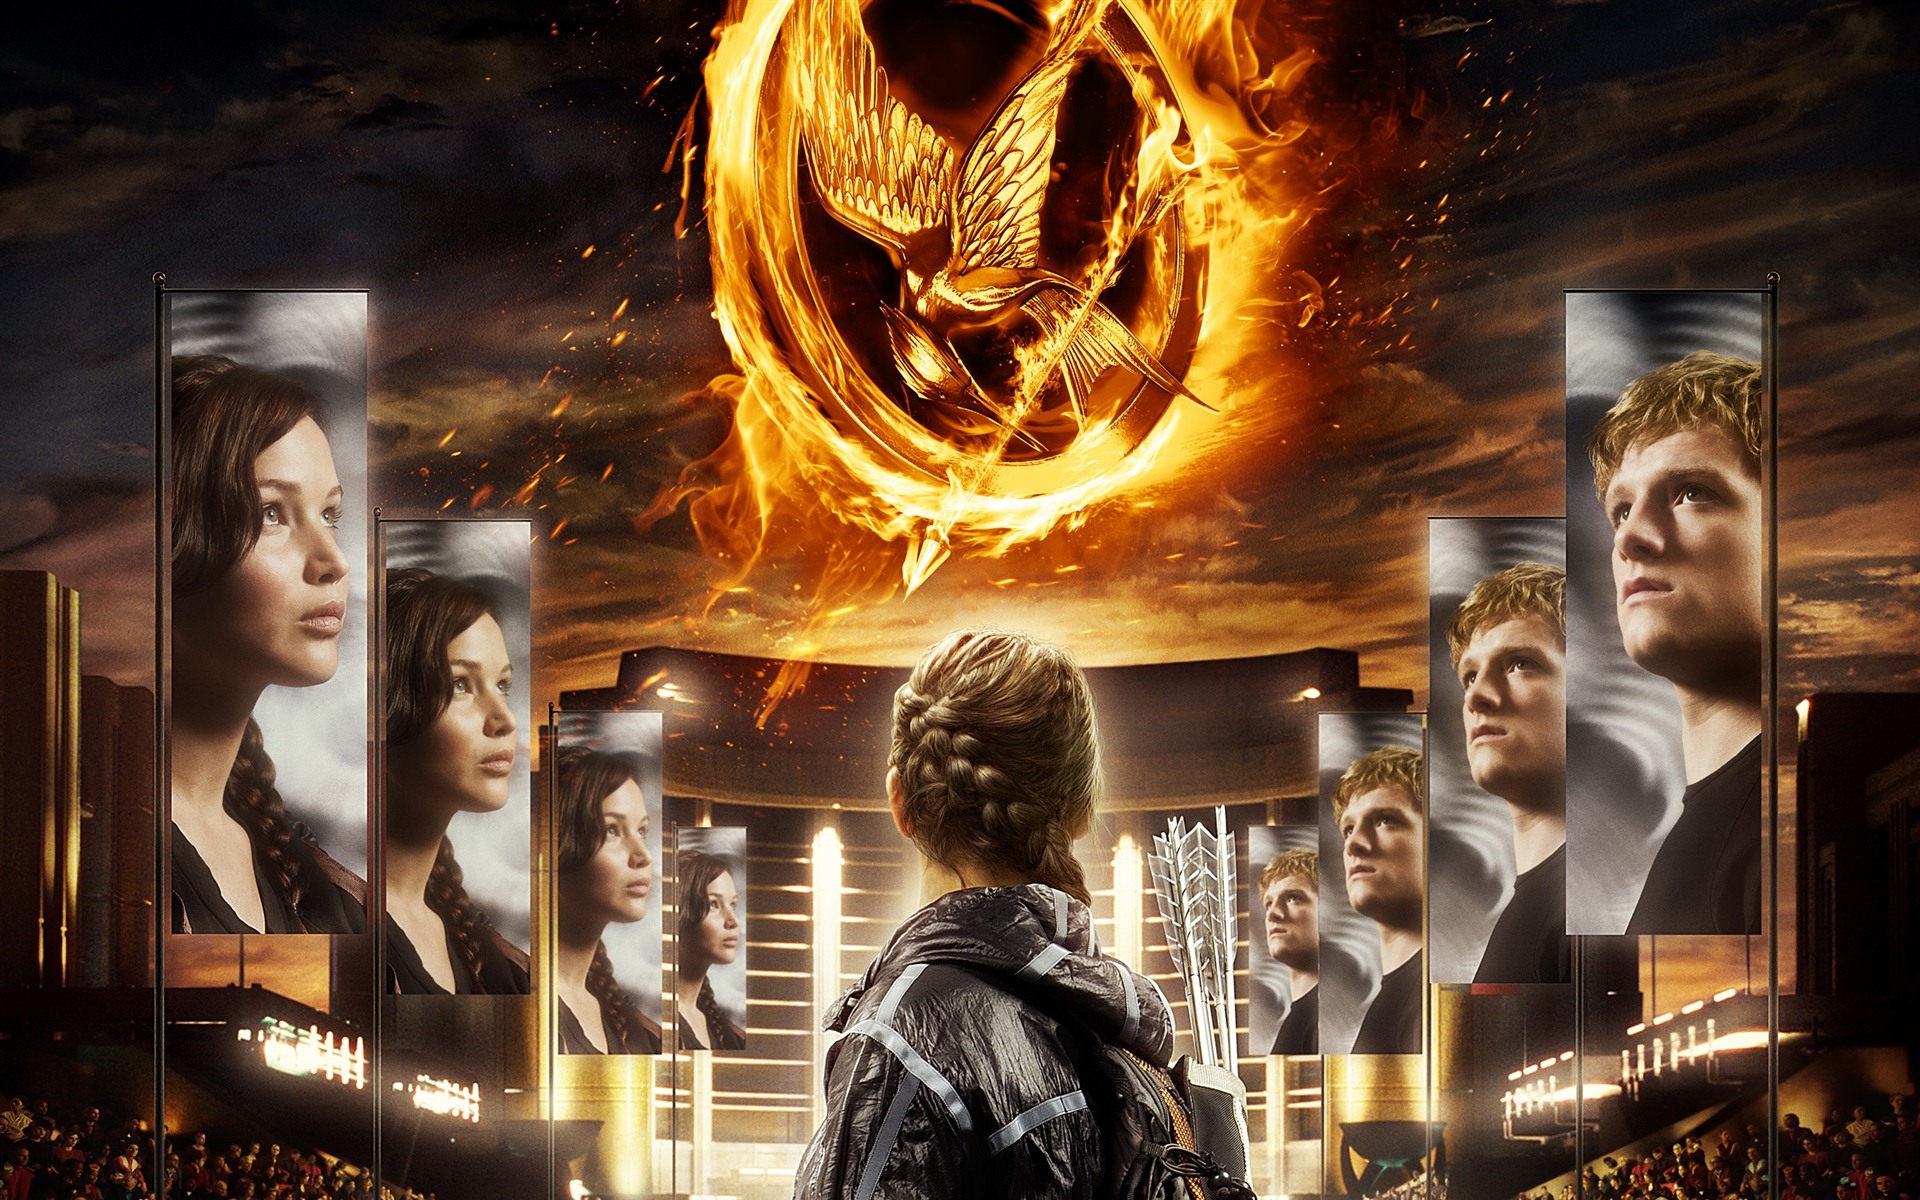 The Hunger Games HD wallpapers #1 - 1920x1200